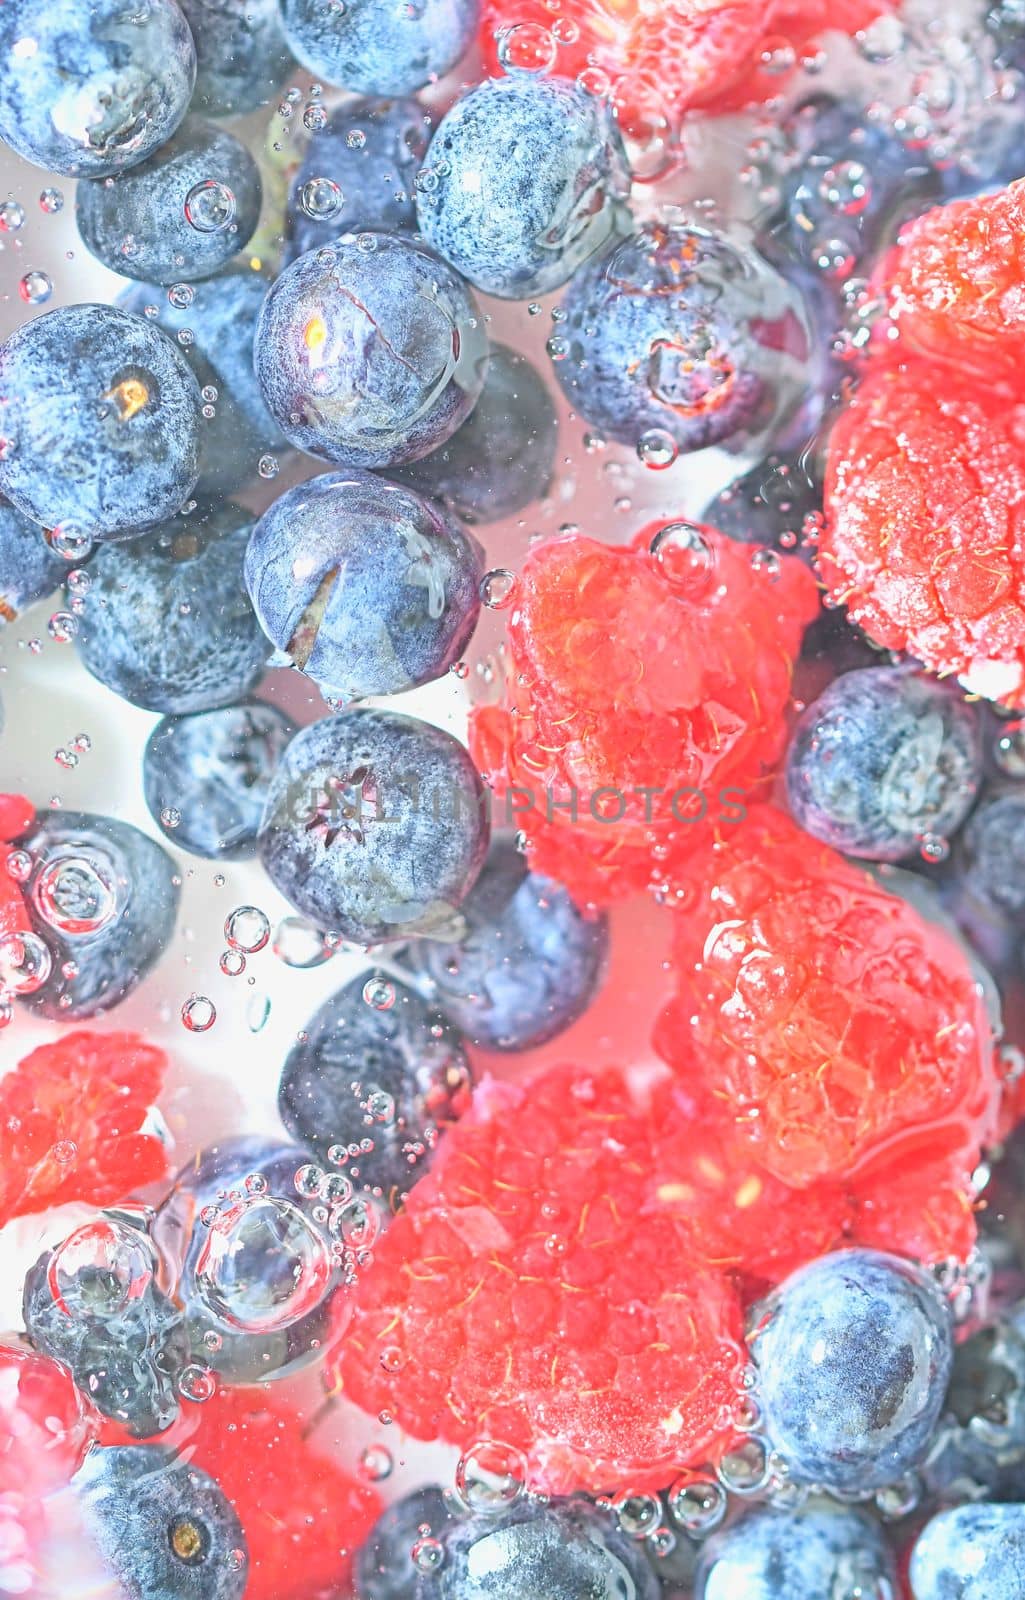 Blueberries and raspberries in liquid with bubbles. Colourful ripe bilberries and raspberries in water. Close-up of fresh berries in water background. Top view, flat design. Vertical macro image by roman_nerud